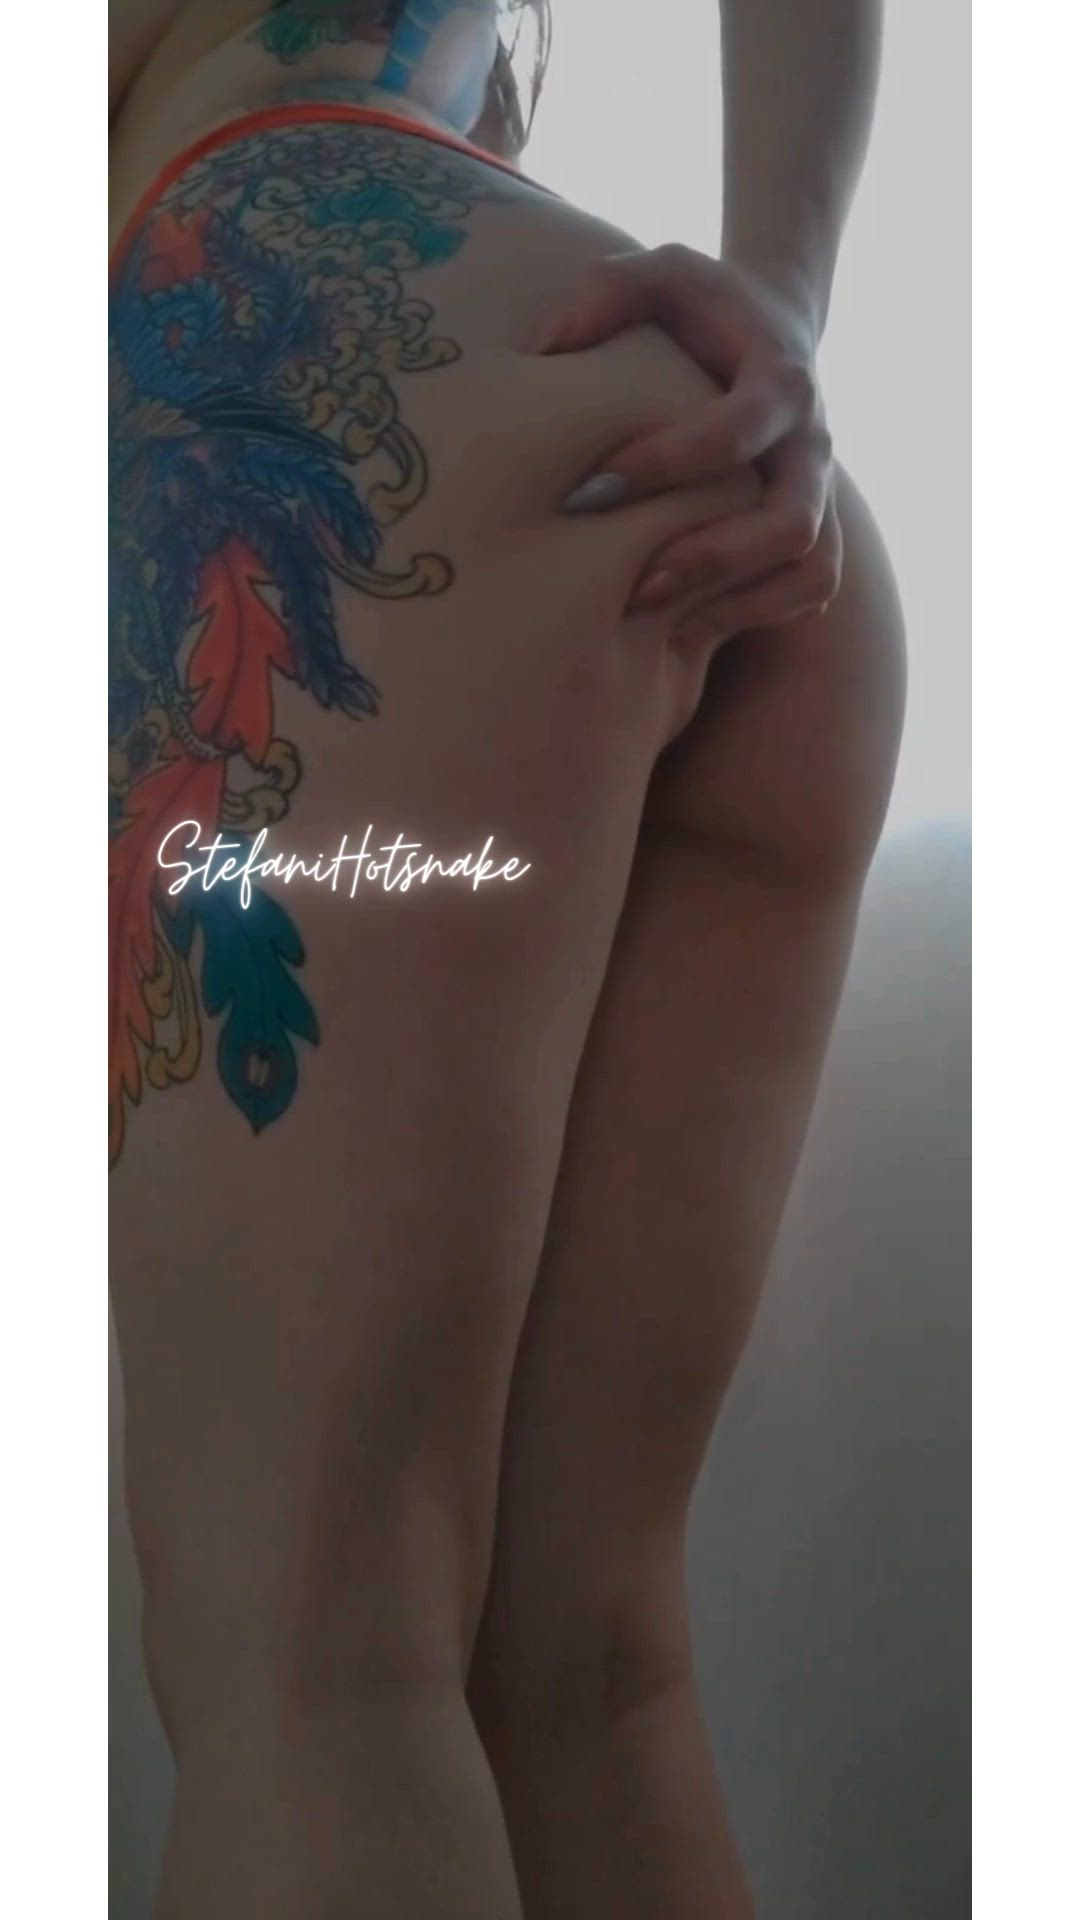 Ass porn video with onlyfans model Exclusivesnake <strong>@stefanihotsnake</strong>